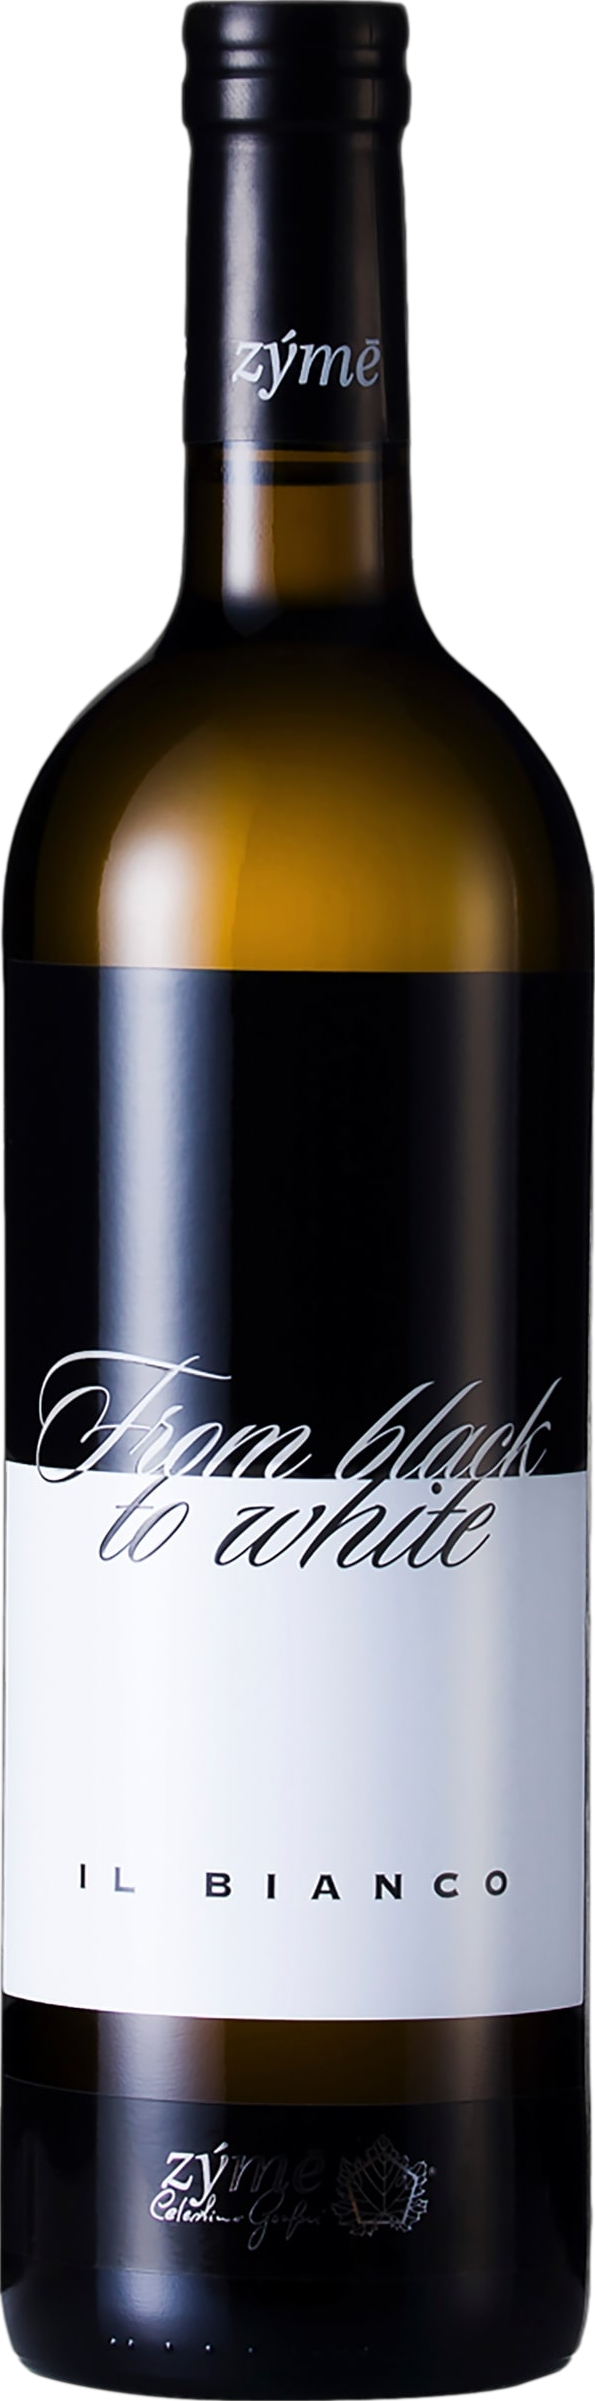 Zyme From Black to White 2020 Zyme 8wines DACH